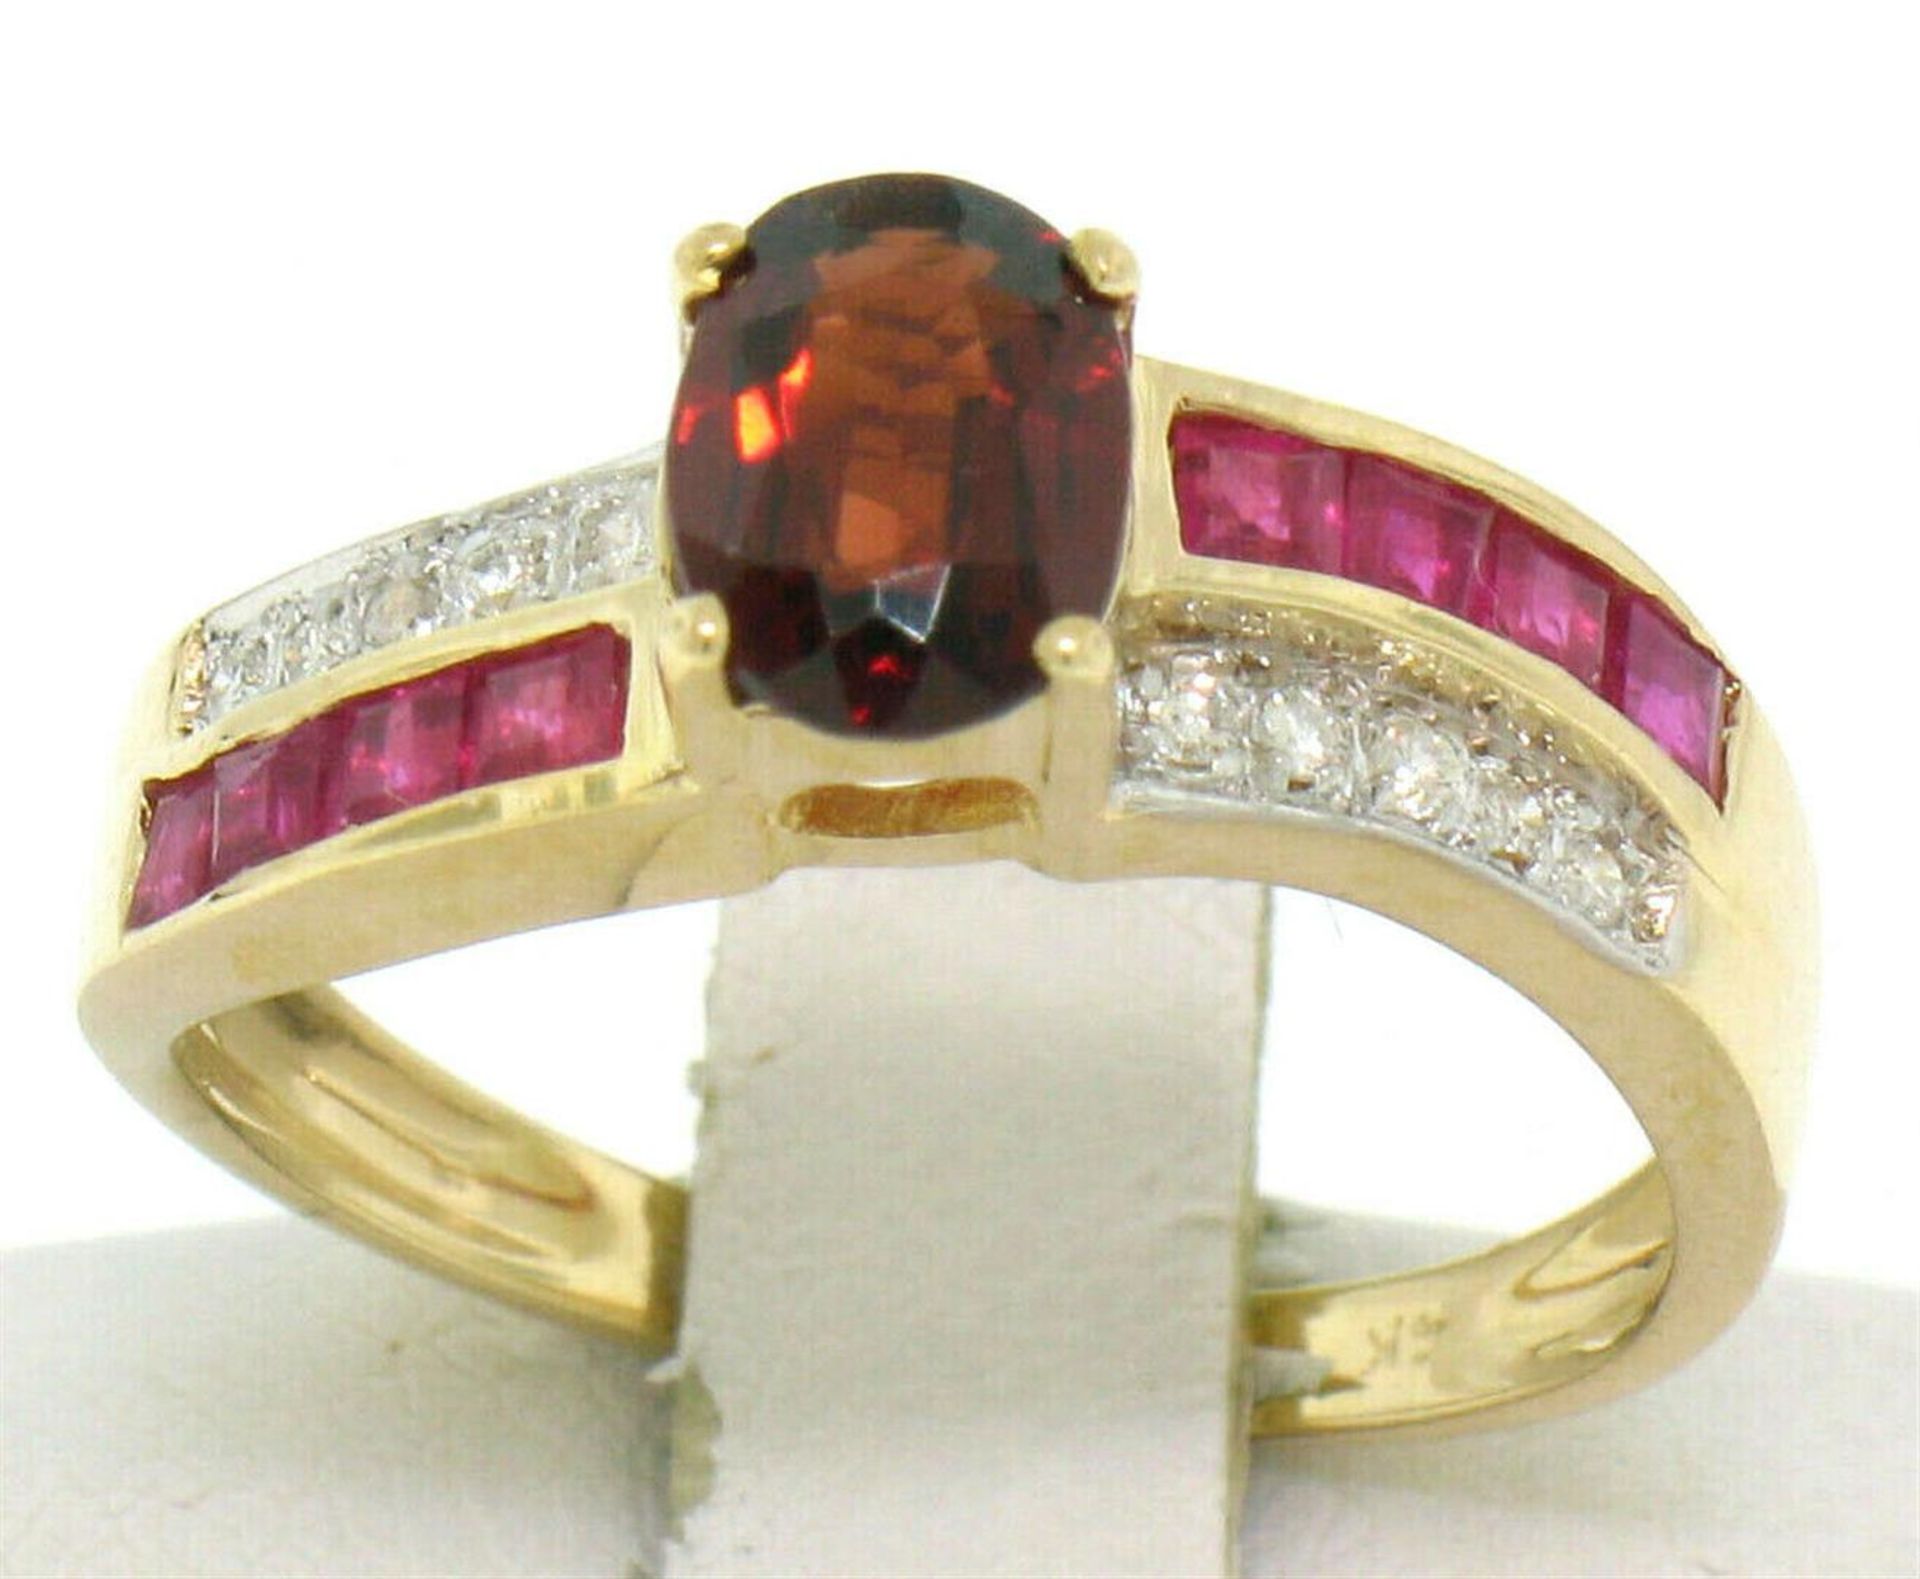 14kt Yellow Gold 1.58ctw Garnet, Ruby, and Diamond Ring - Image 2 of 6